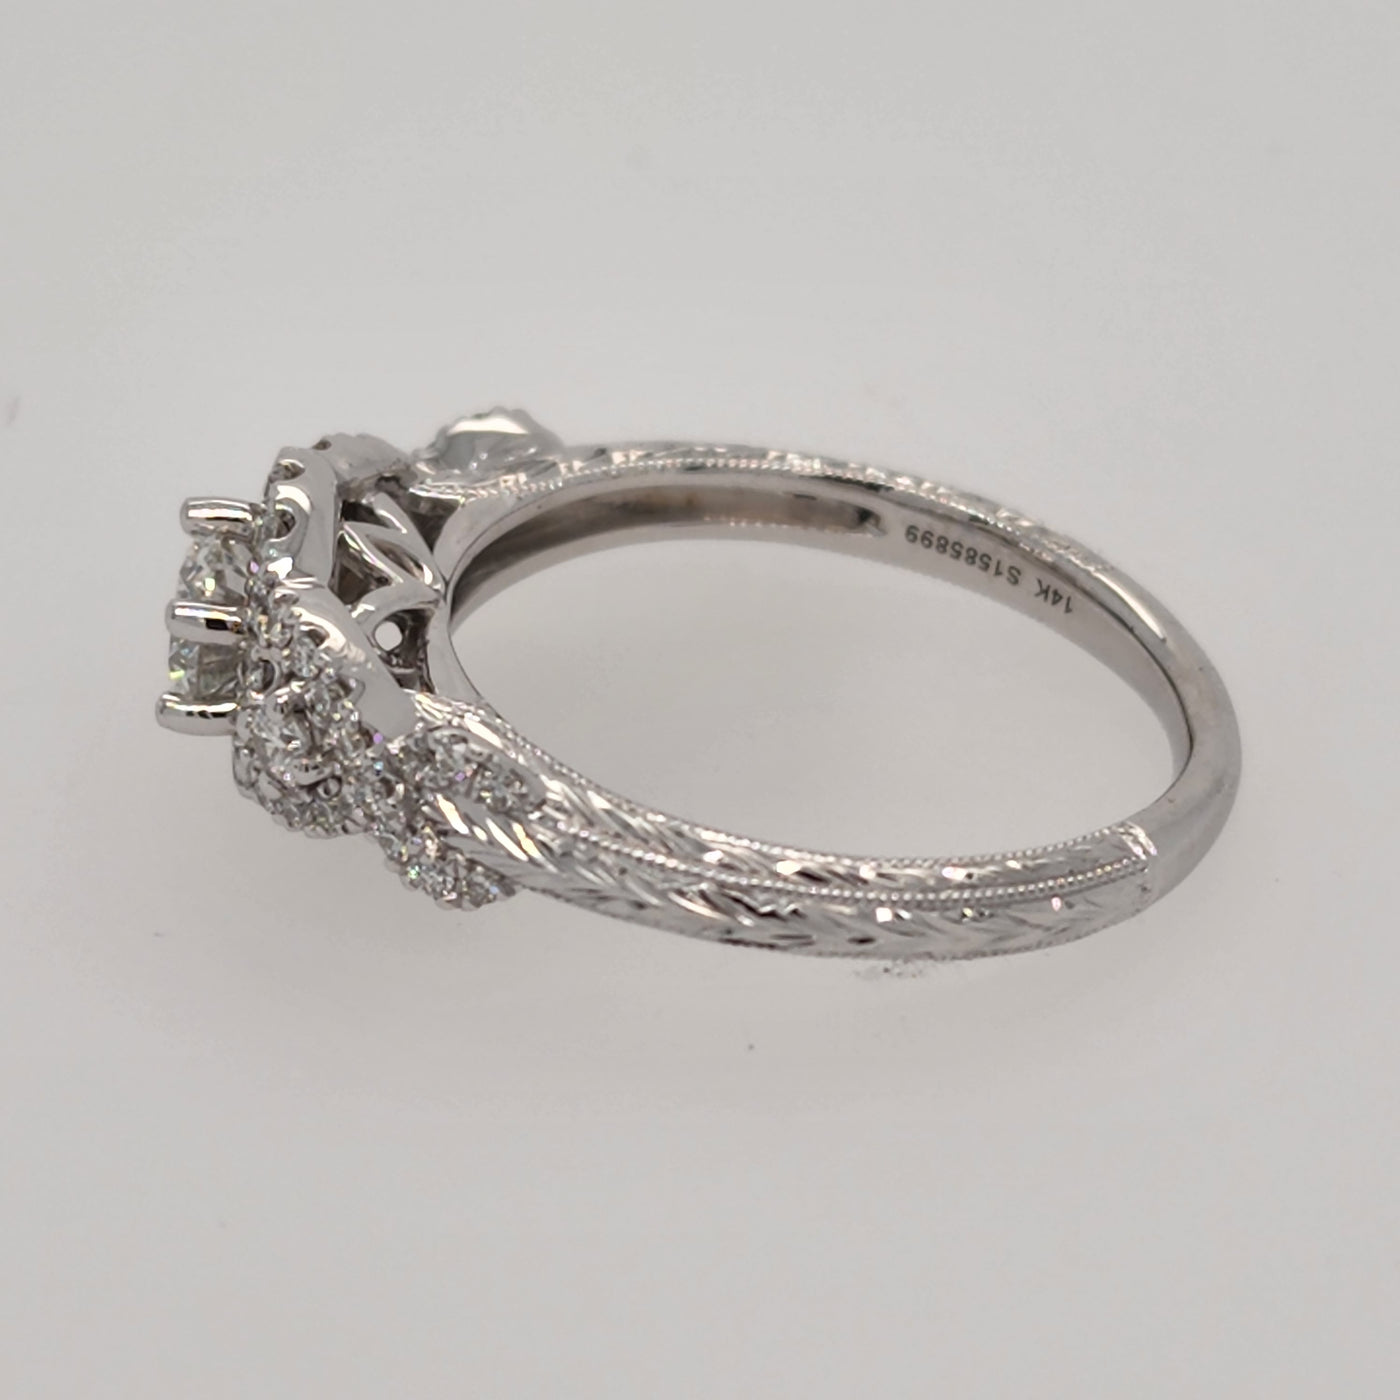 White Gold Engagement Ring With Floral Design